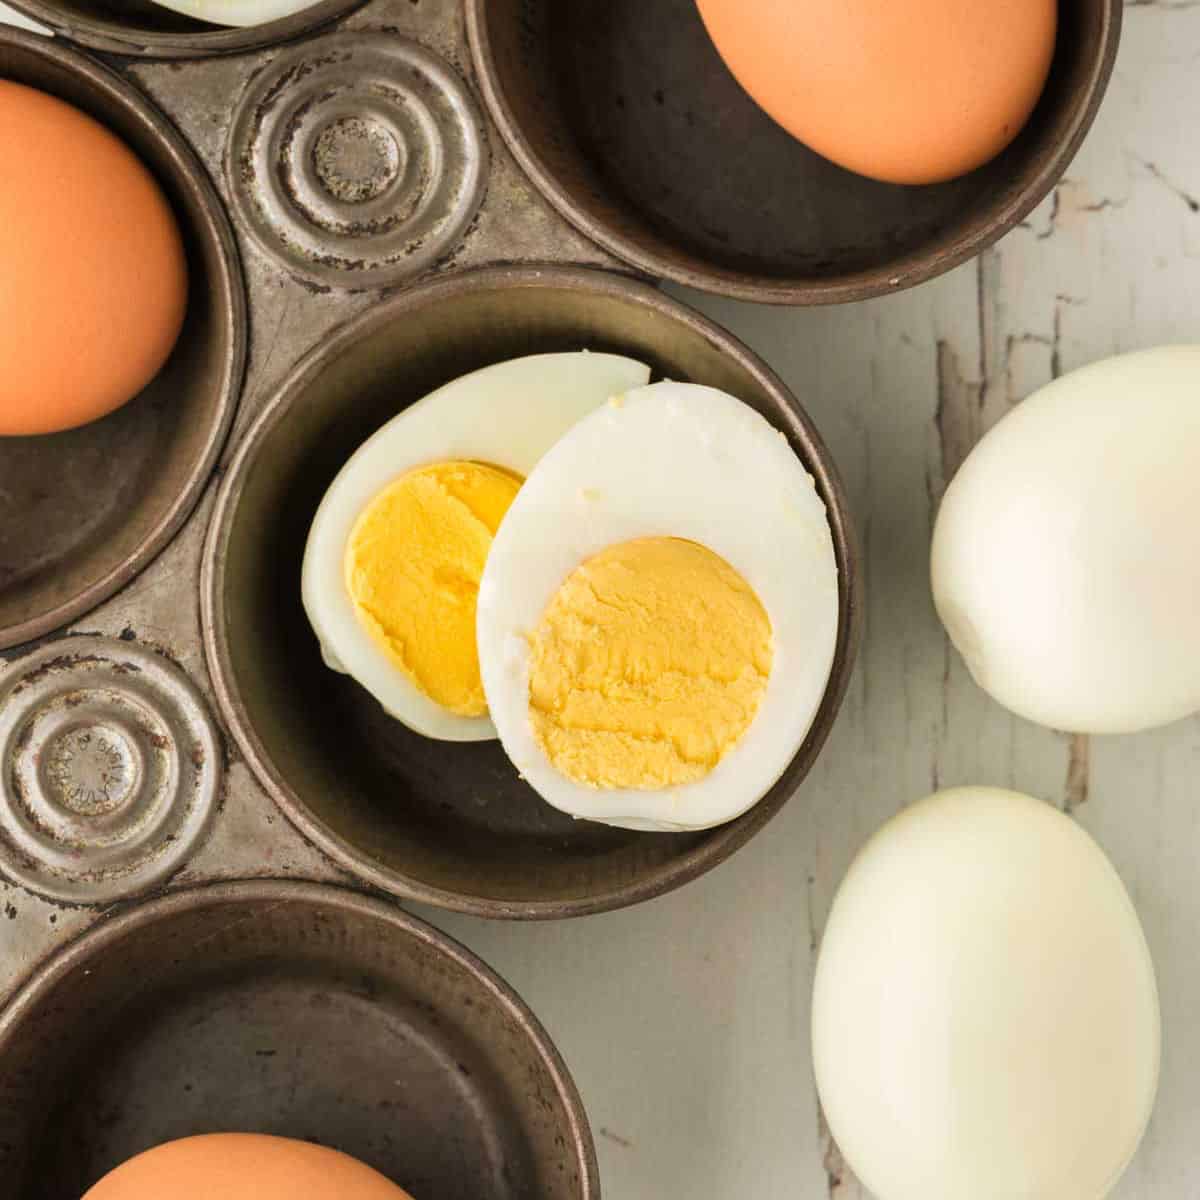 REVIEW: Trying Easy Method for Hard Boiled Eggs + Photos